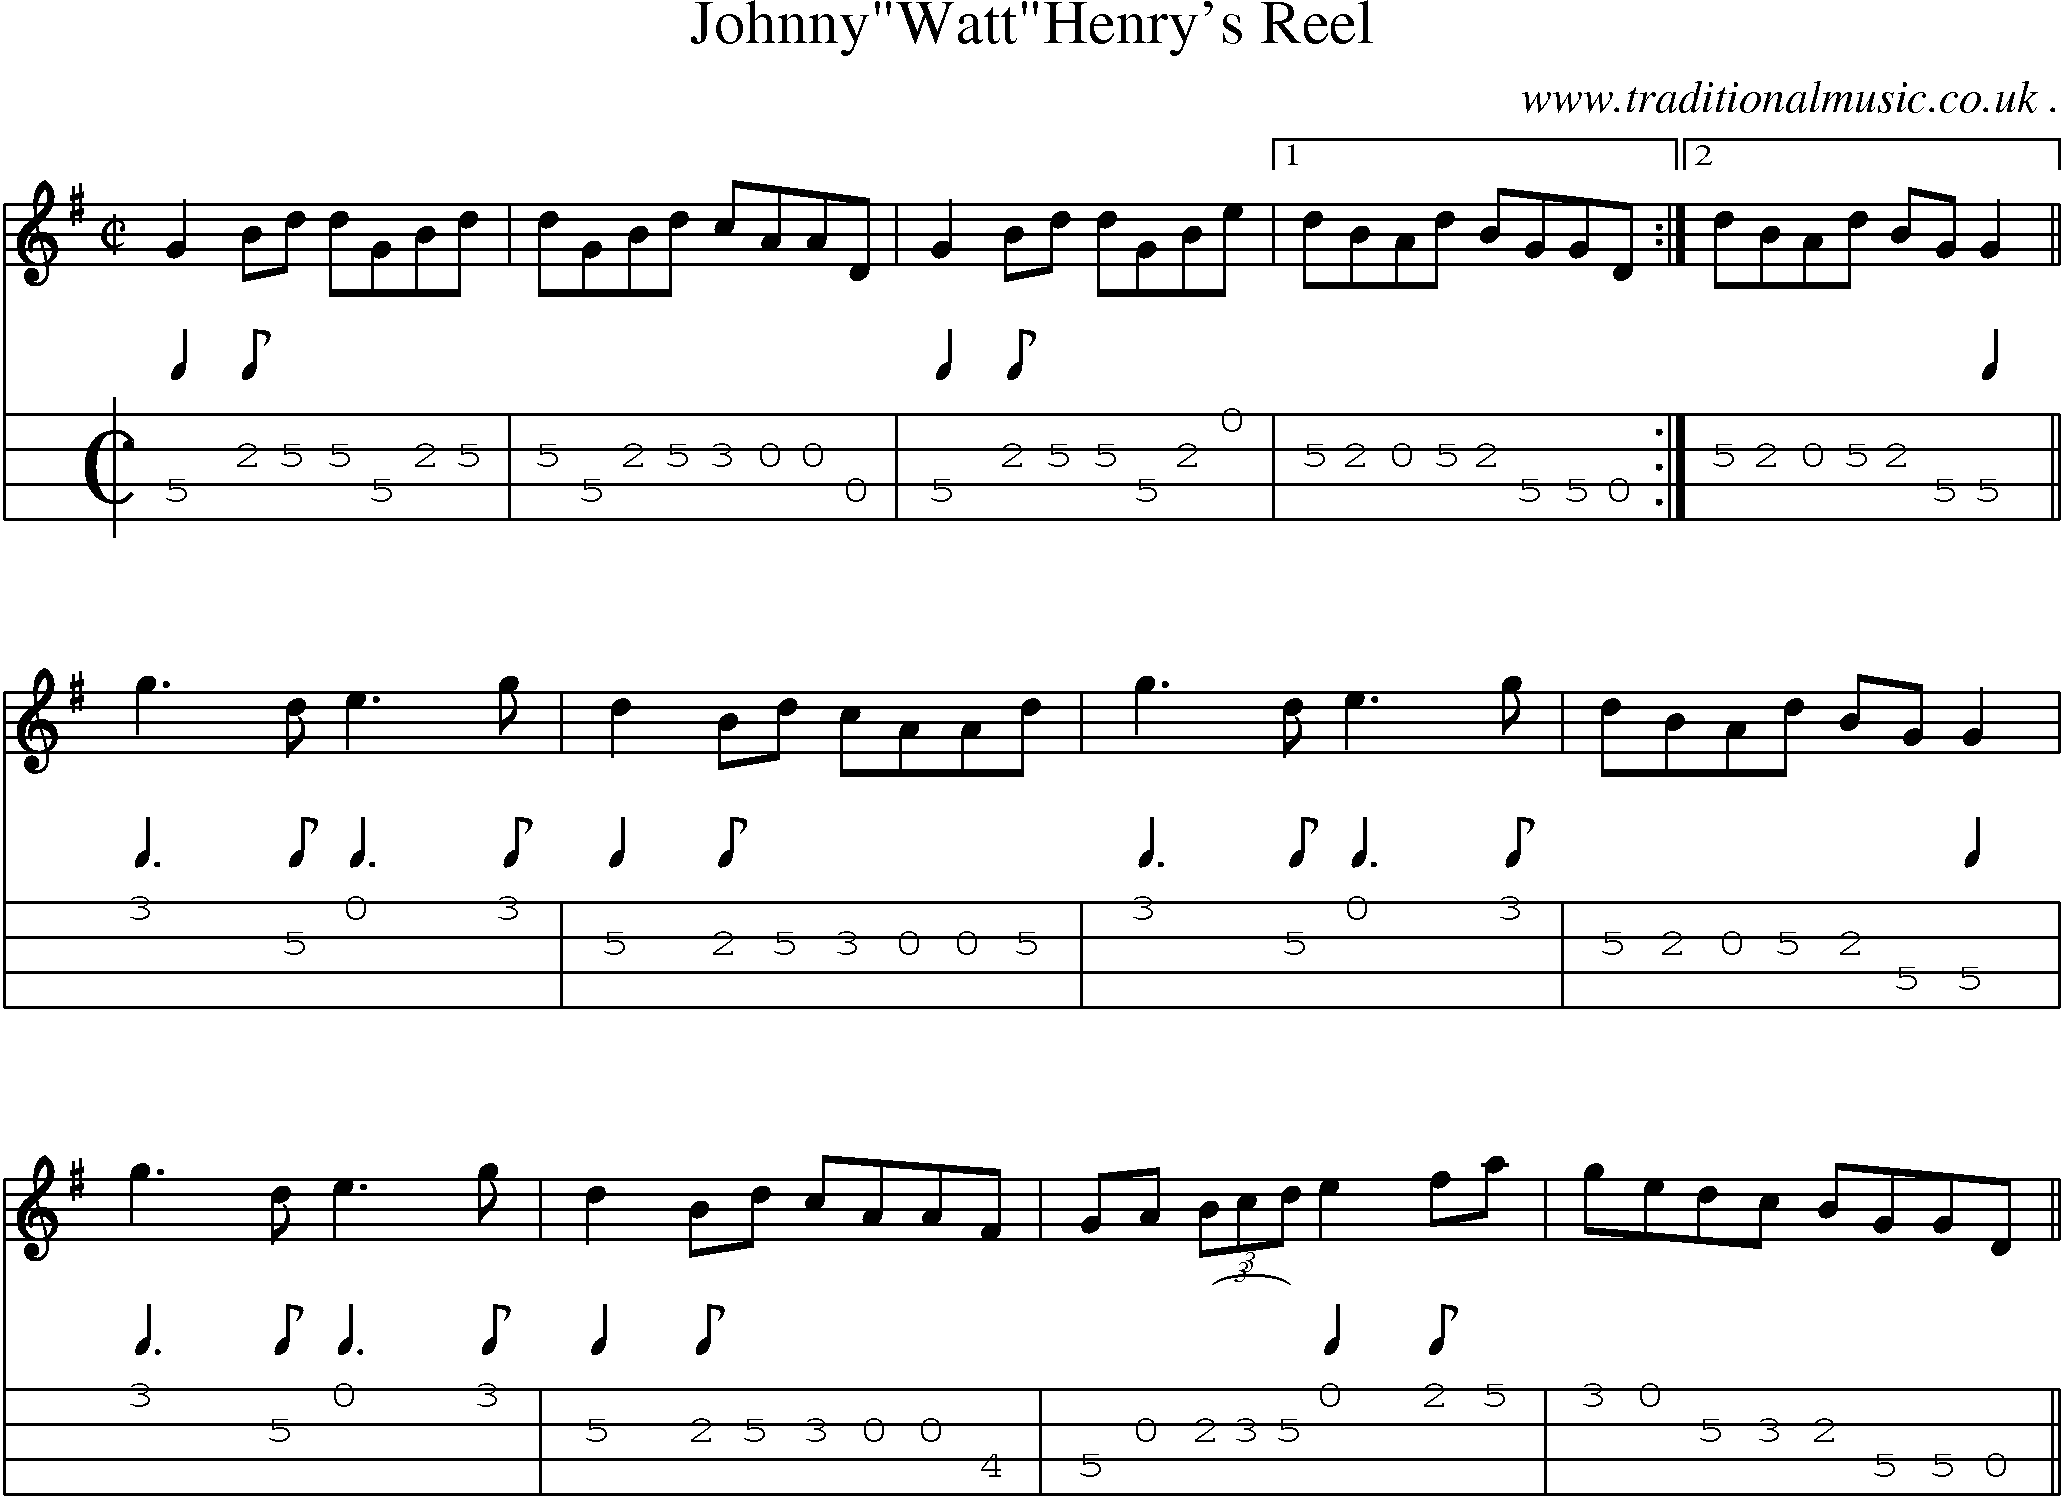 Sheet-Music and Mandolin Tabs for Johnnywatthenrys Reel